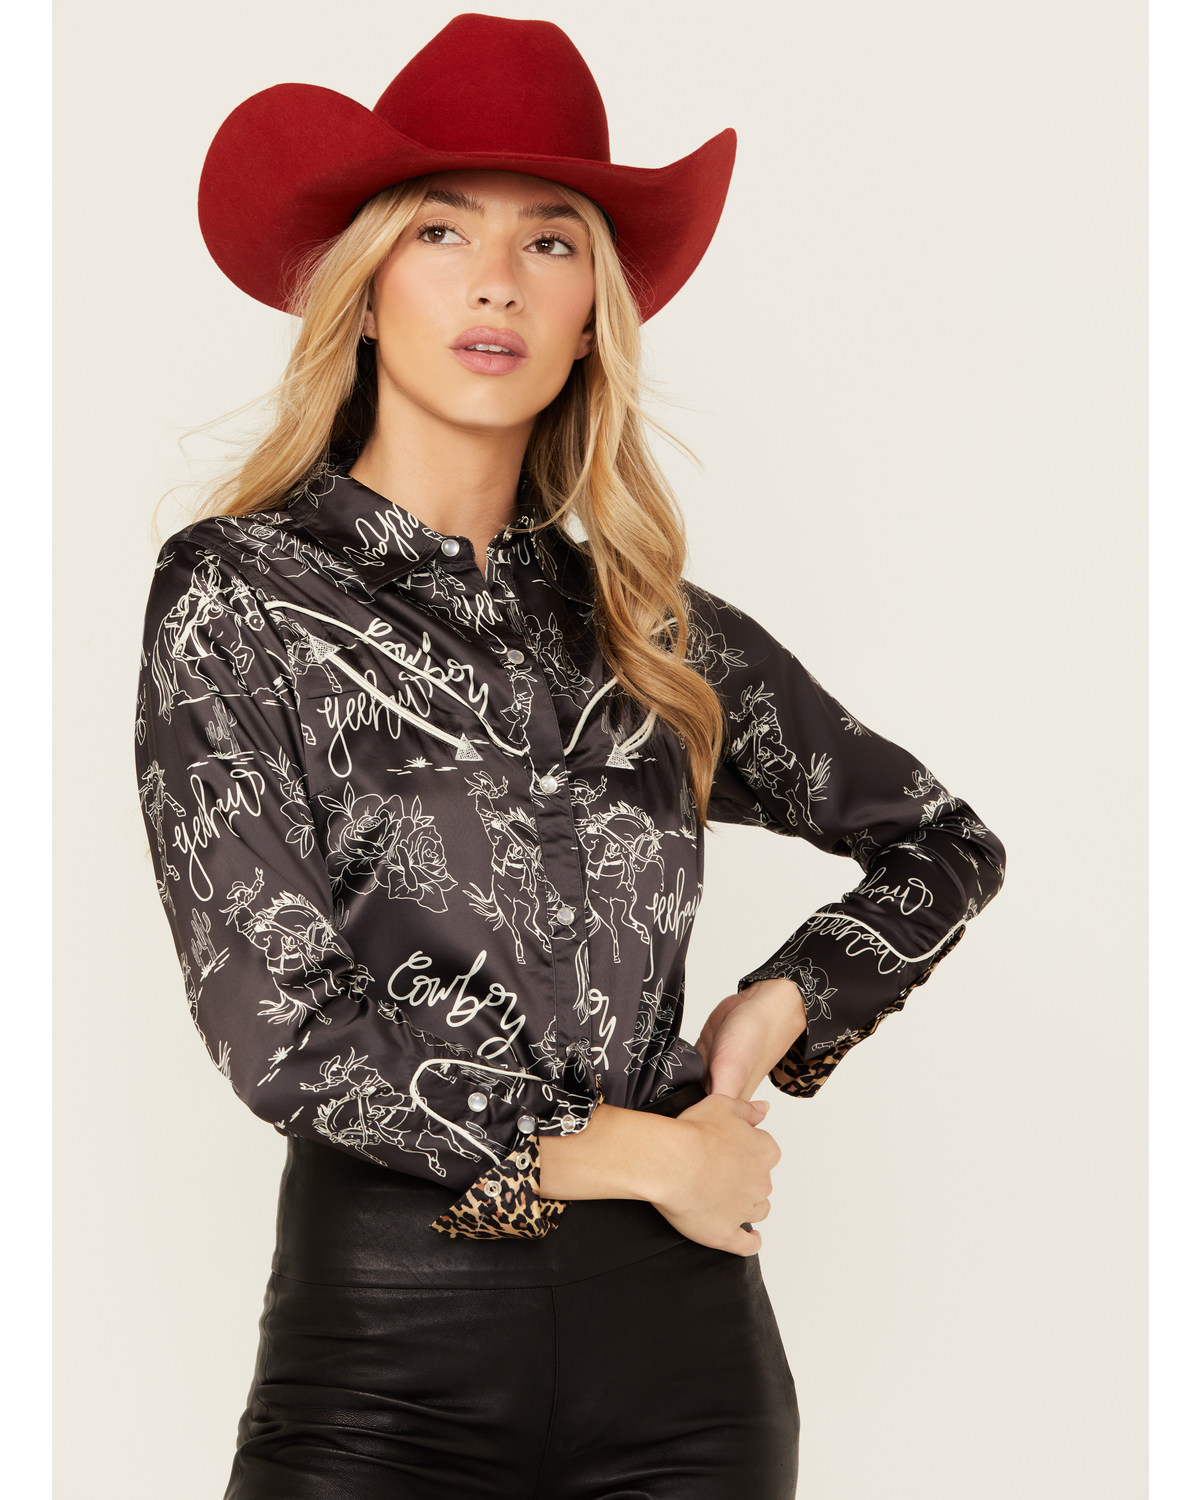 Rodeo Quincy Women's Horse Print Long Sleeve Pearl Snap Western Shirt